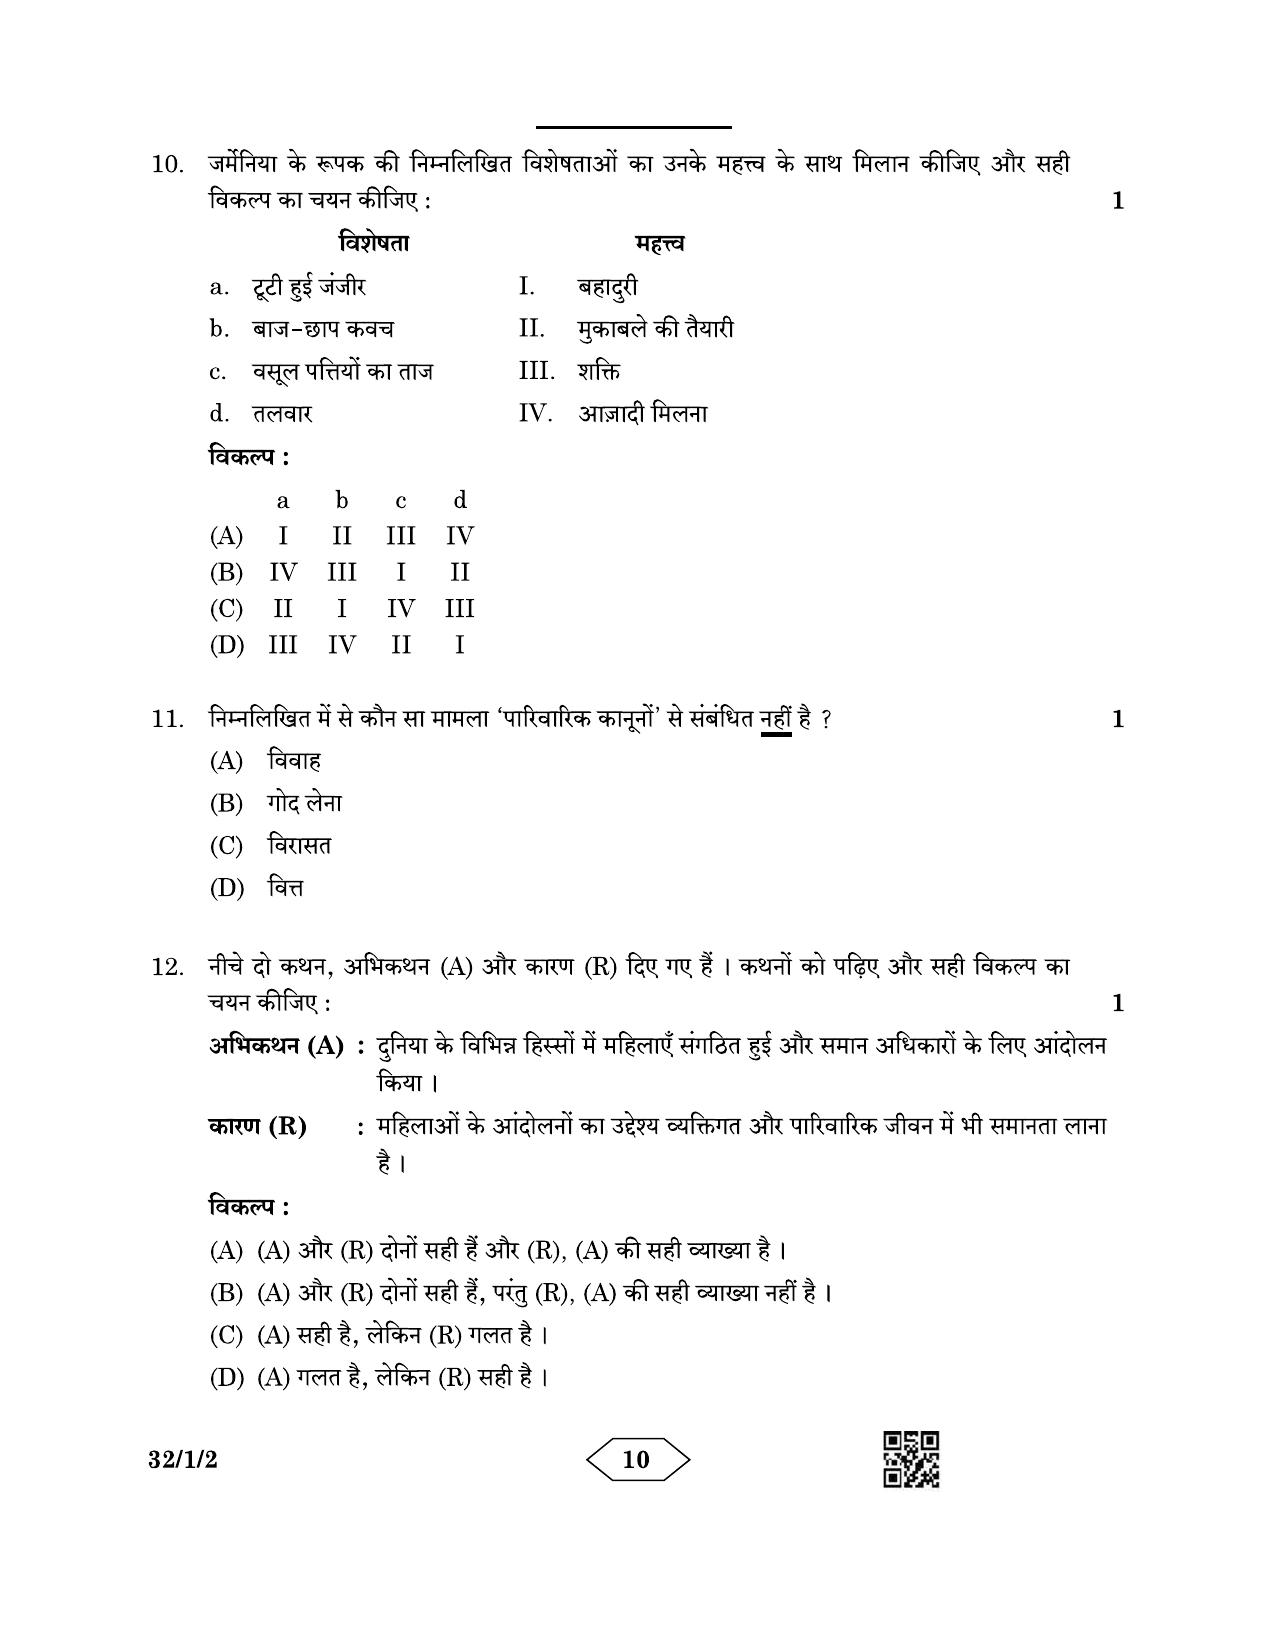 CBSE Class 10 32-1-2 Social Science 2023 Question Paper - Page 10